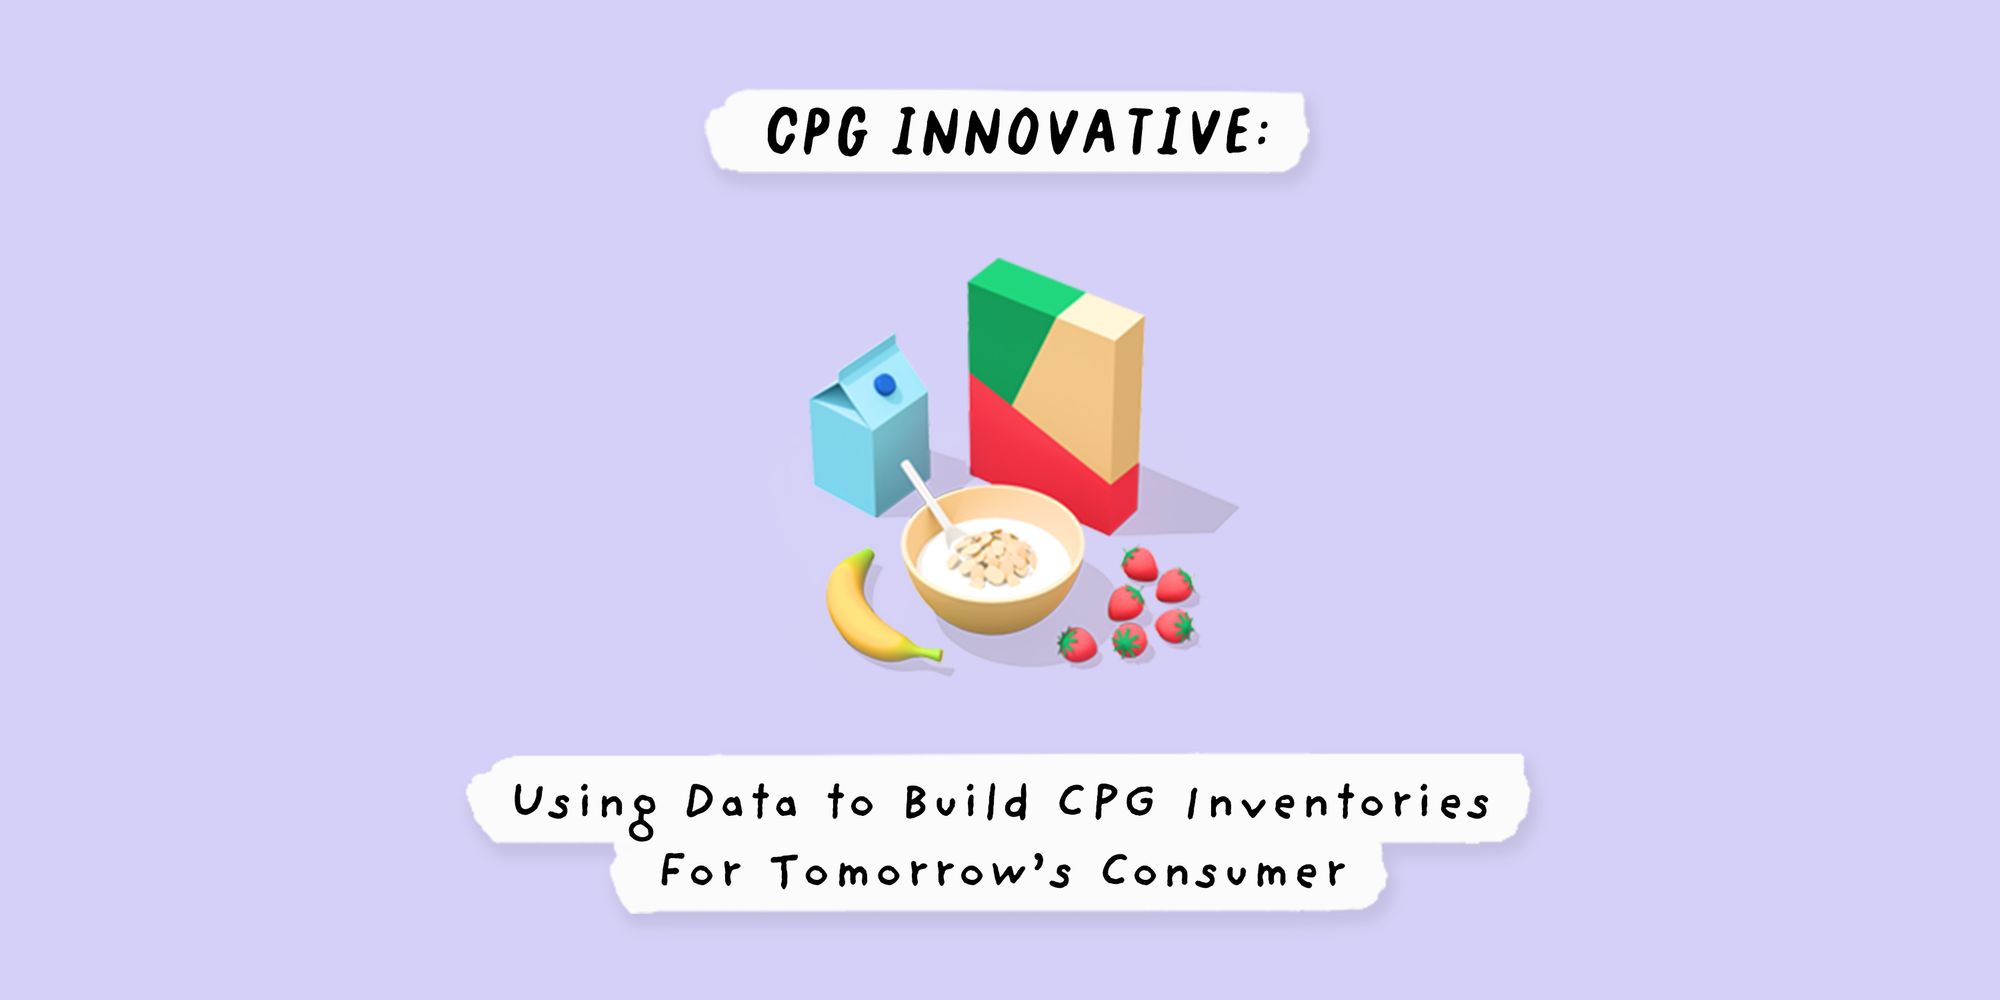 CPG Innovative: Using data to build CPG inventories for tomorrow’s consumer